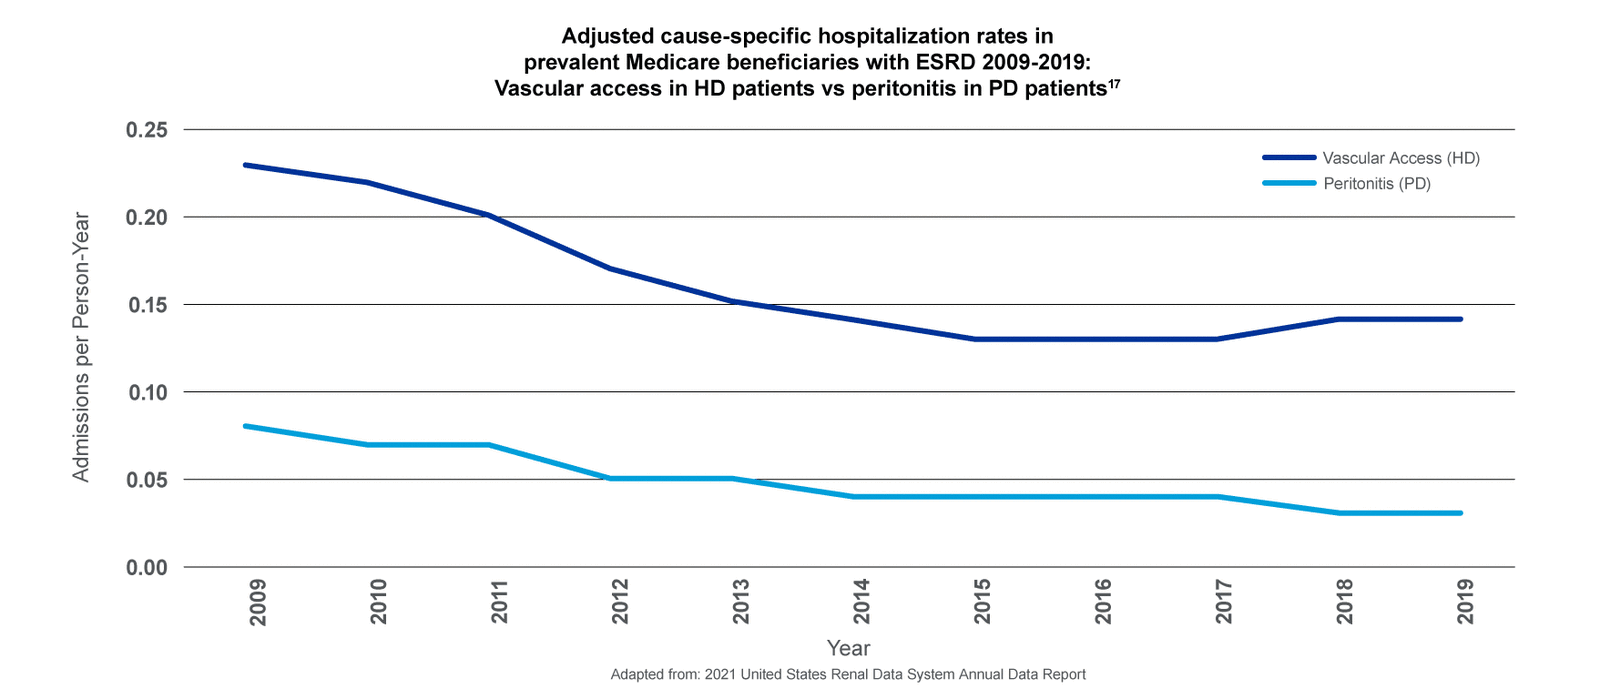 Chart showing Adjusted cause-specific hospitalization rates in prevalent Medicare beneficiaries with ESRD 2009-2019: Vascular access in HD patients vs peritonitis in PD patients